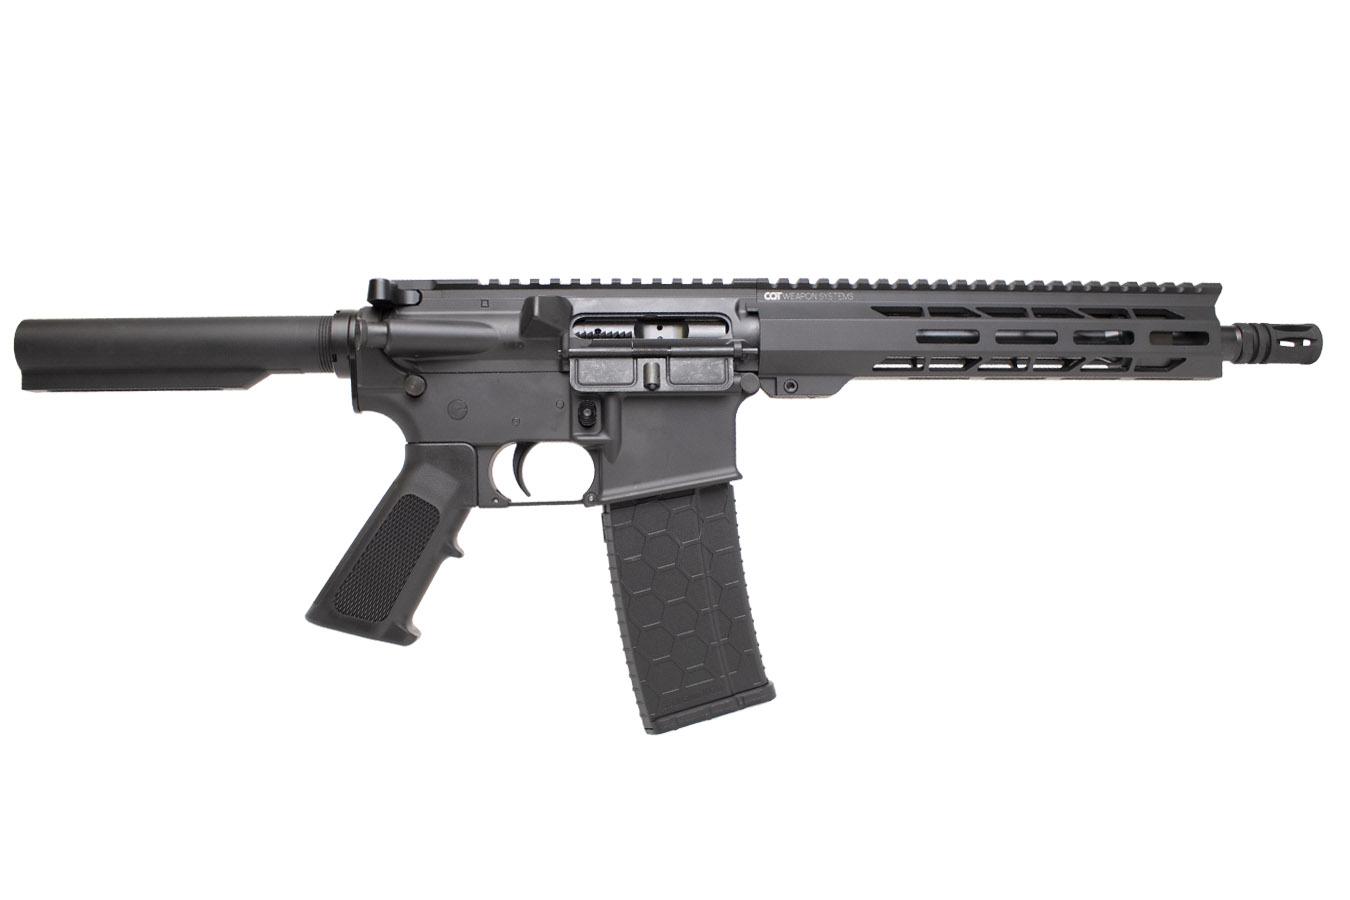 No. 32 Best Selling: CQT WEAPON SYSTEMS CQT15 5.56MM 10.5` BARREL